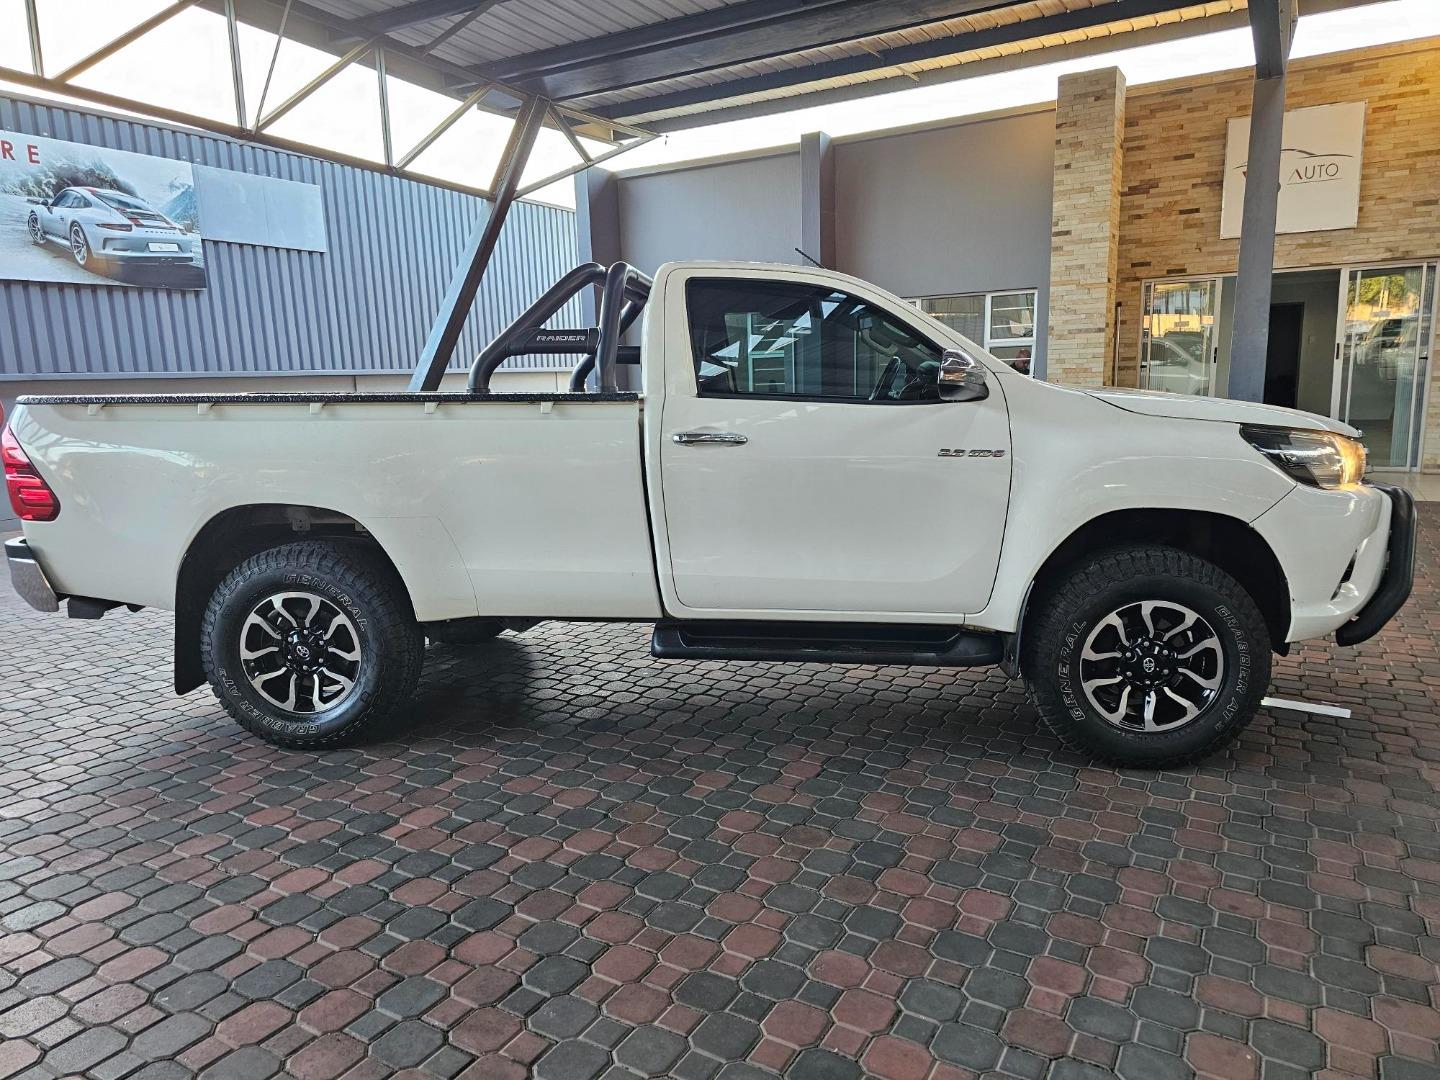 2016 Toyota Hilux 2.8GD-6 Raider For Sale